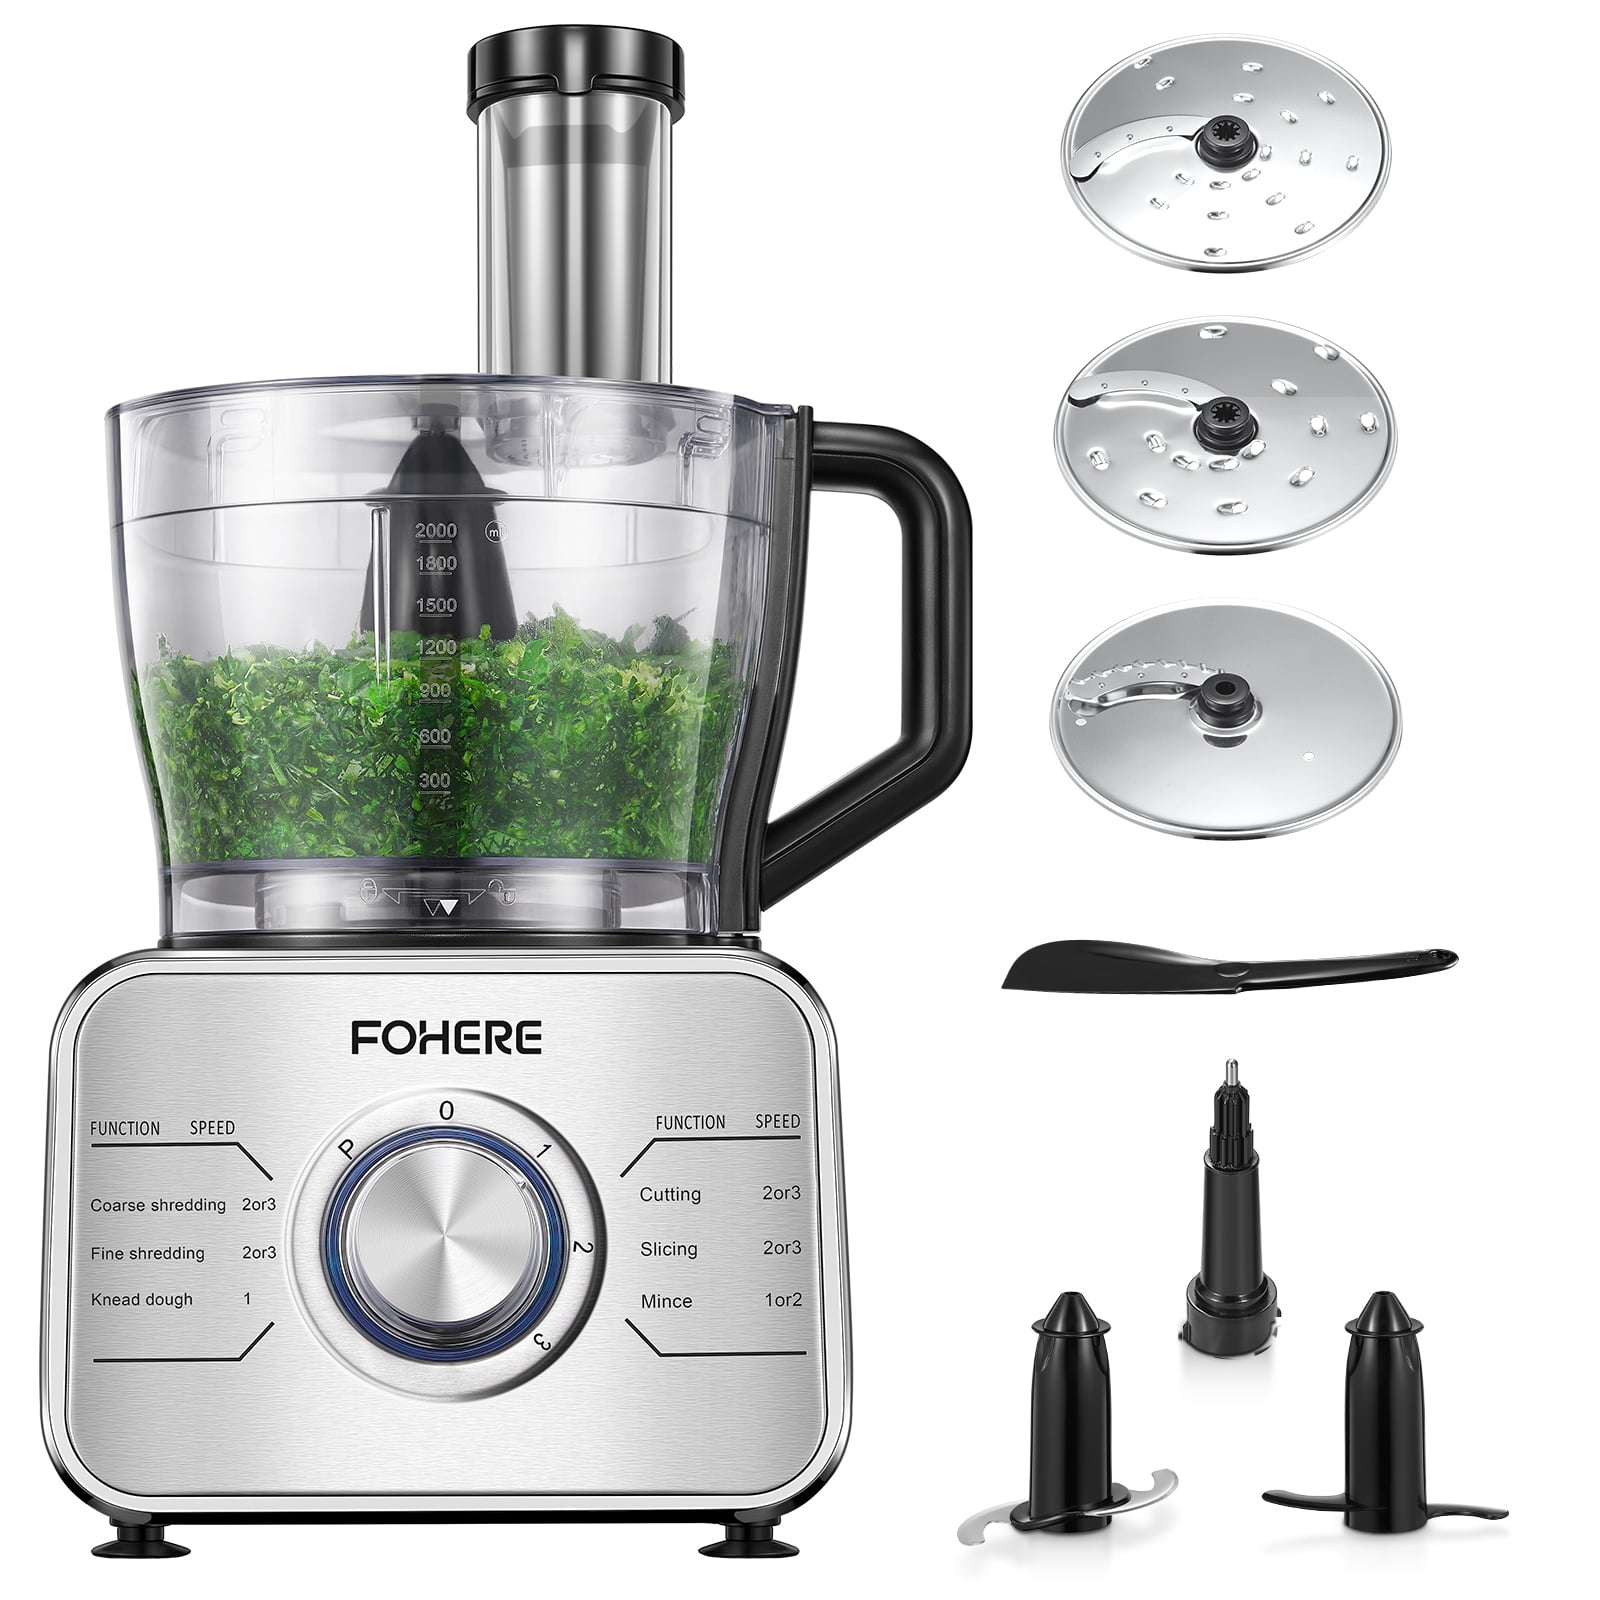 FOHERE 12 Cup Food Processor, Multi-functional Vegetable Cutter, 3 Speeds 6  Main Functions with Chopper Blade, Dough Blade, Shredder, Slicing